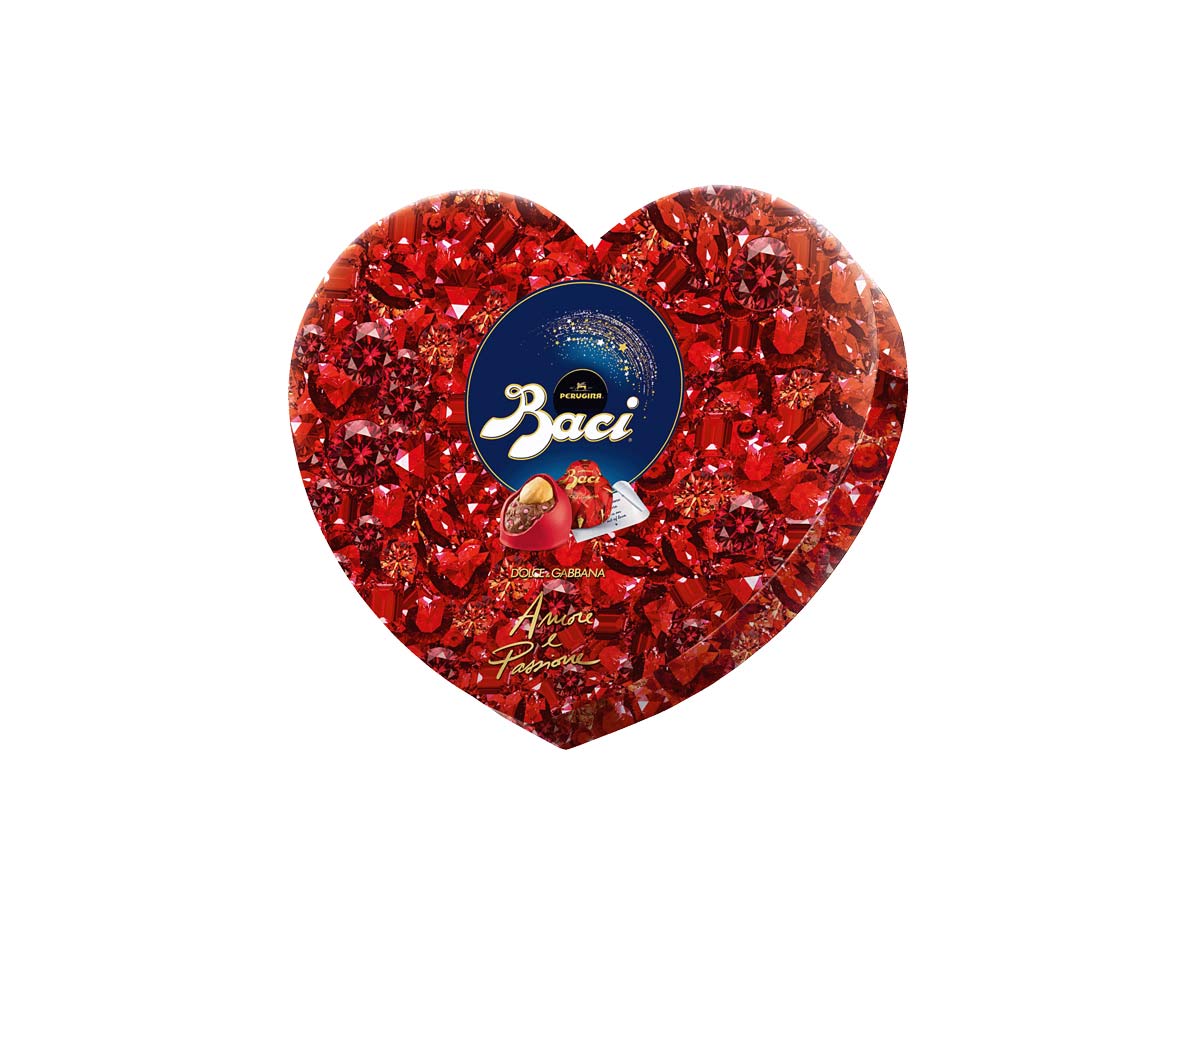 Baci Perugina Limited Edition Red Cuore 100g